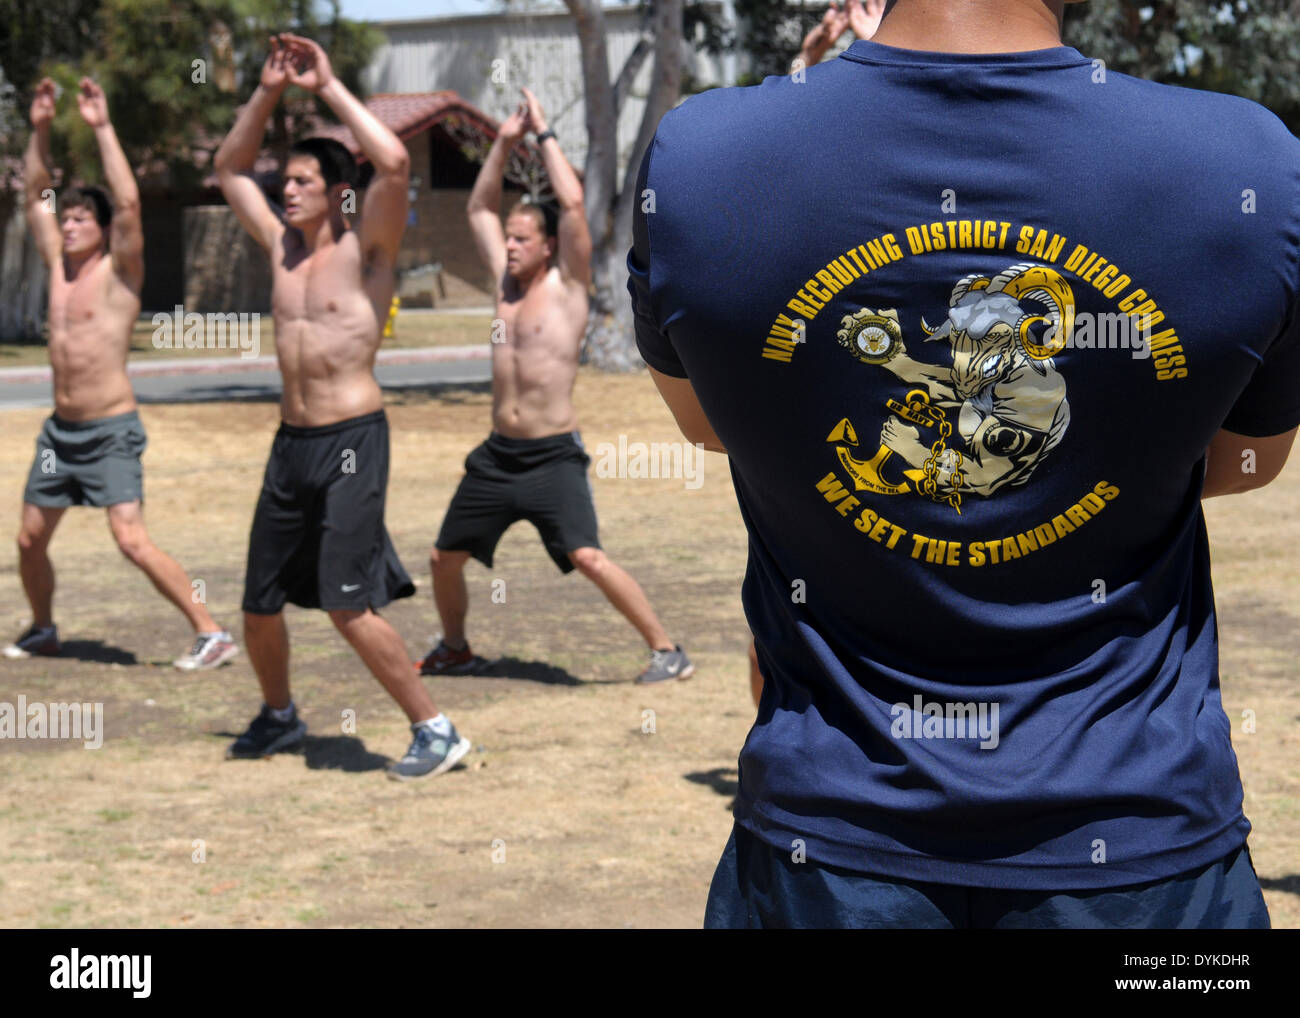 US Naval Special Warfare candidates perform jumping jacks during a Navy Recruiting District San Diego weekly Navy Special Warfare physical screening test June 24, 2013 in San Diego, Calfornia. Navy Recruiting Command conducts the program to find the top candidates to fill Navy Special Warfare billets, which include SEAL, explosive ordnance disposal, special warfare boat operator, Navy diver, and naval air crewman positions. Stock Photo